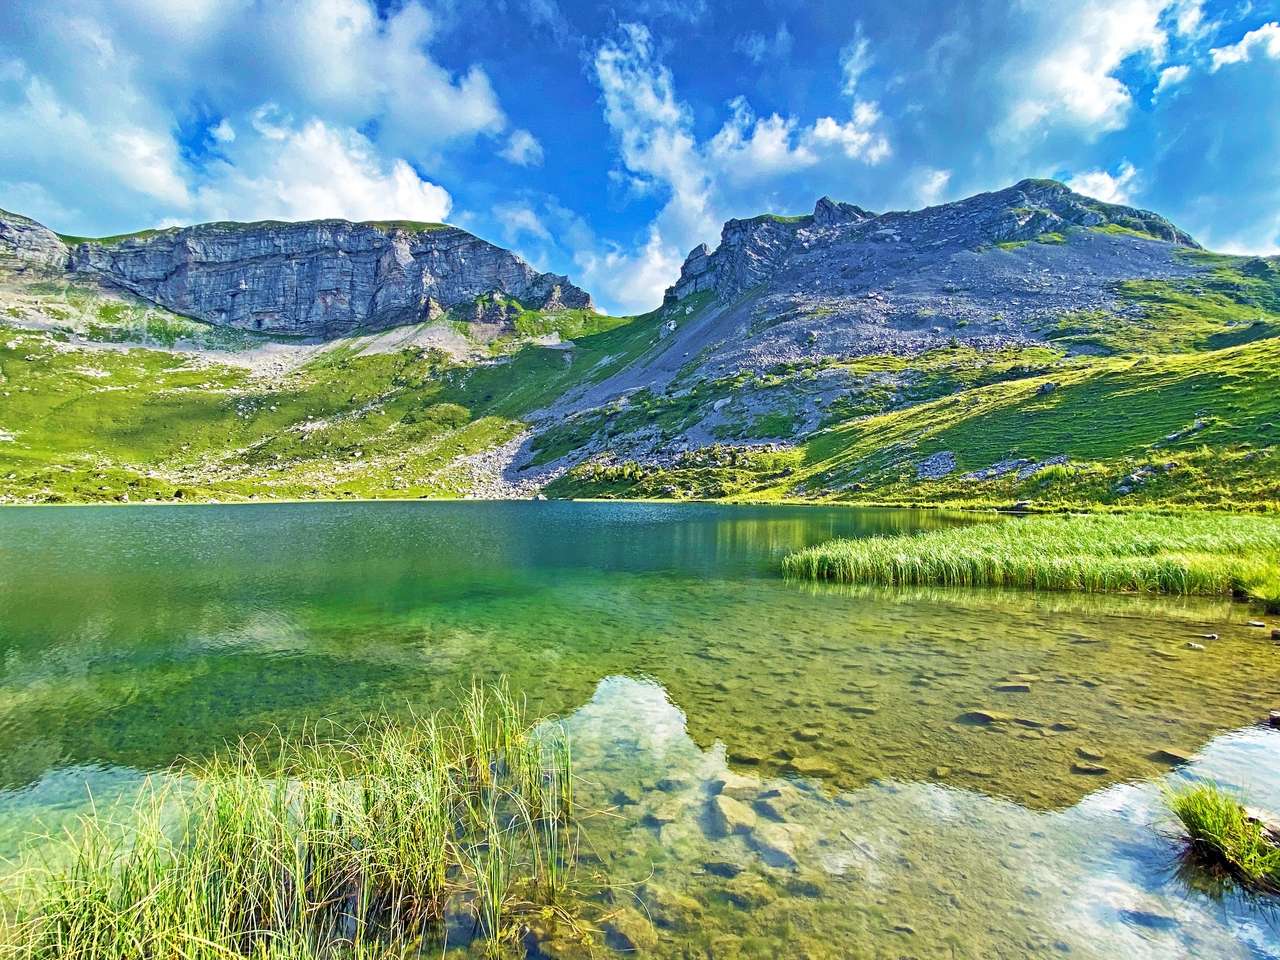 The alpine lake Seefeldsee puzzle online from photo